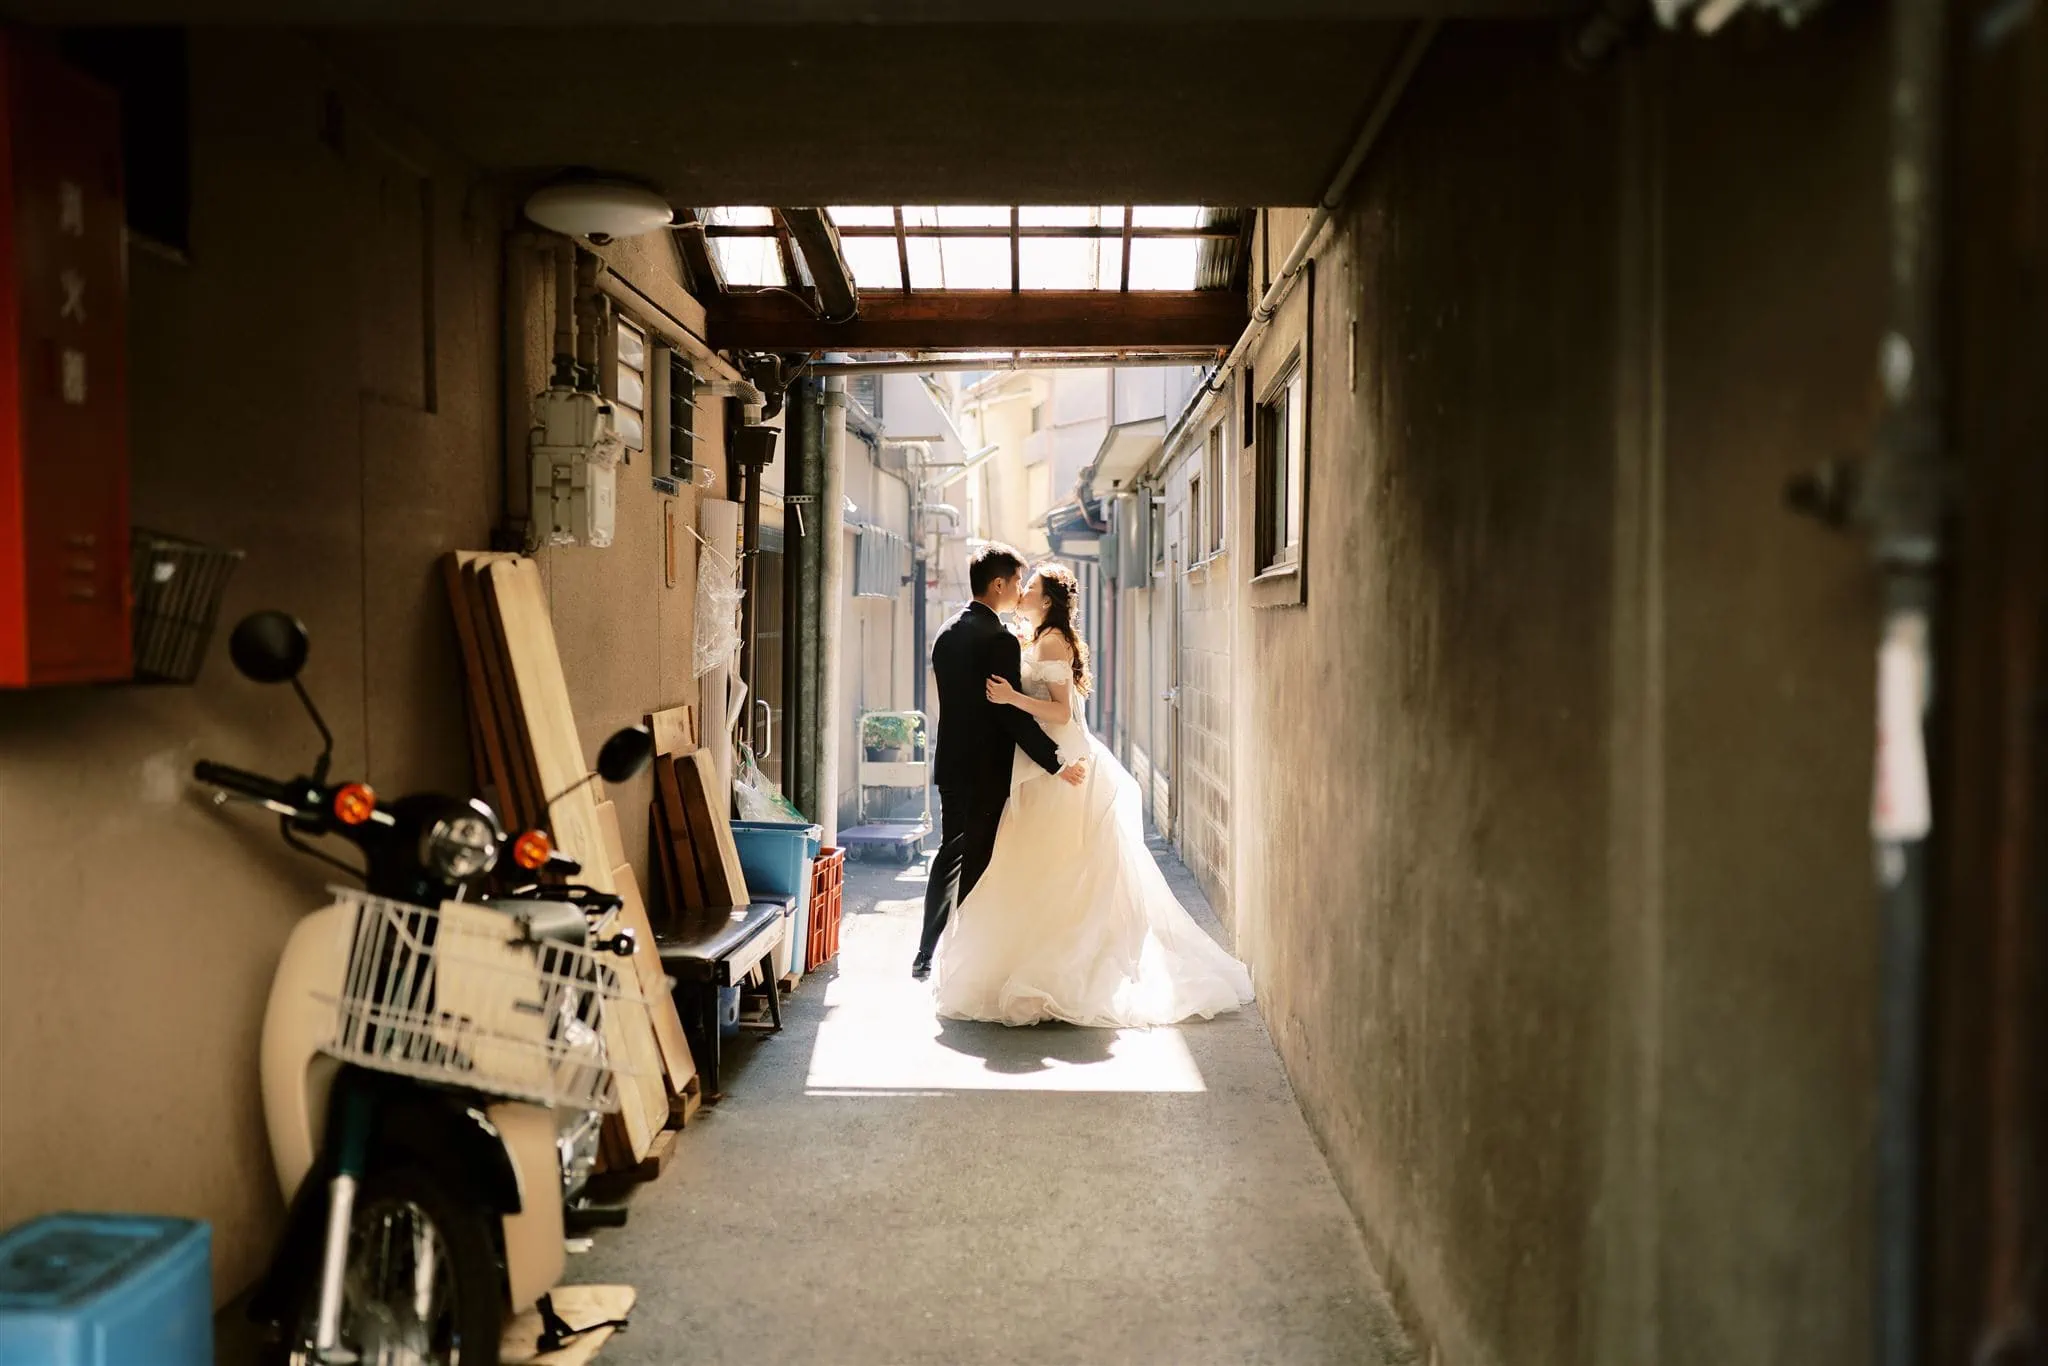 Japan Elopement Wedding Photographer, Planner & Videographer |         Description: A bride and groom experiencing a picturesque Kyoto Elopement Wedding in a narrow alleyway.